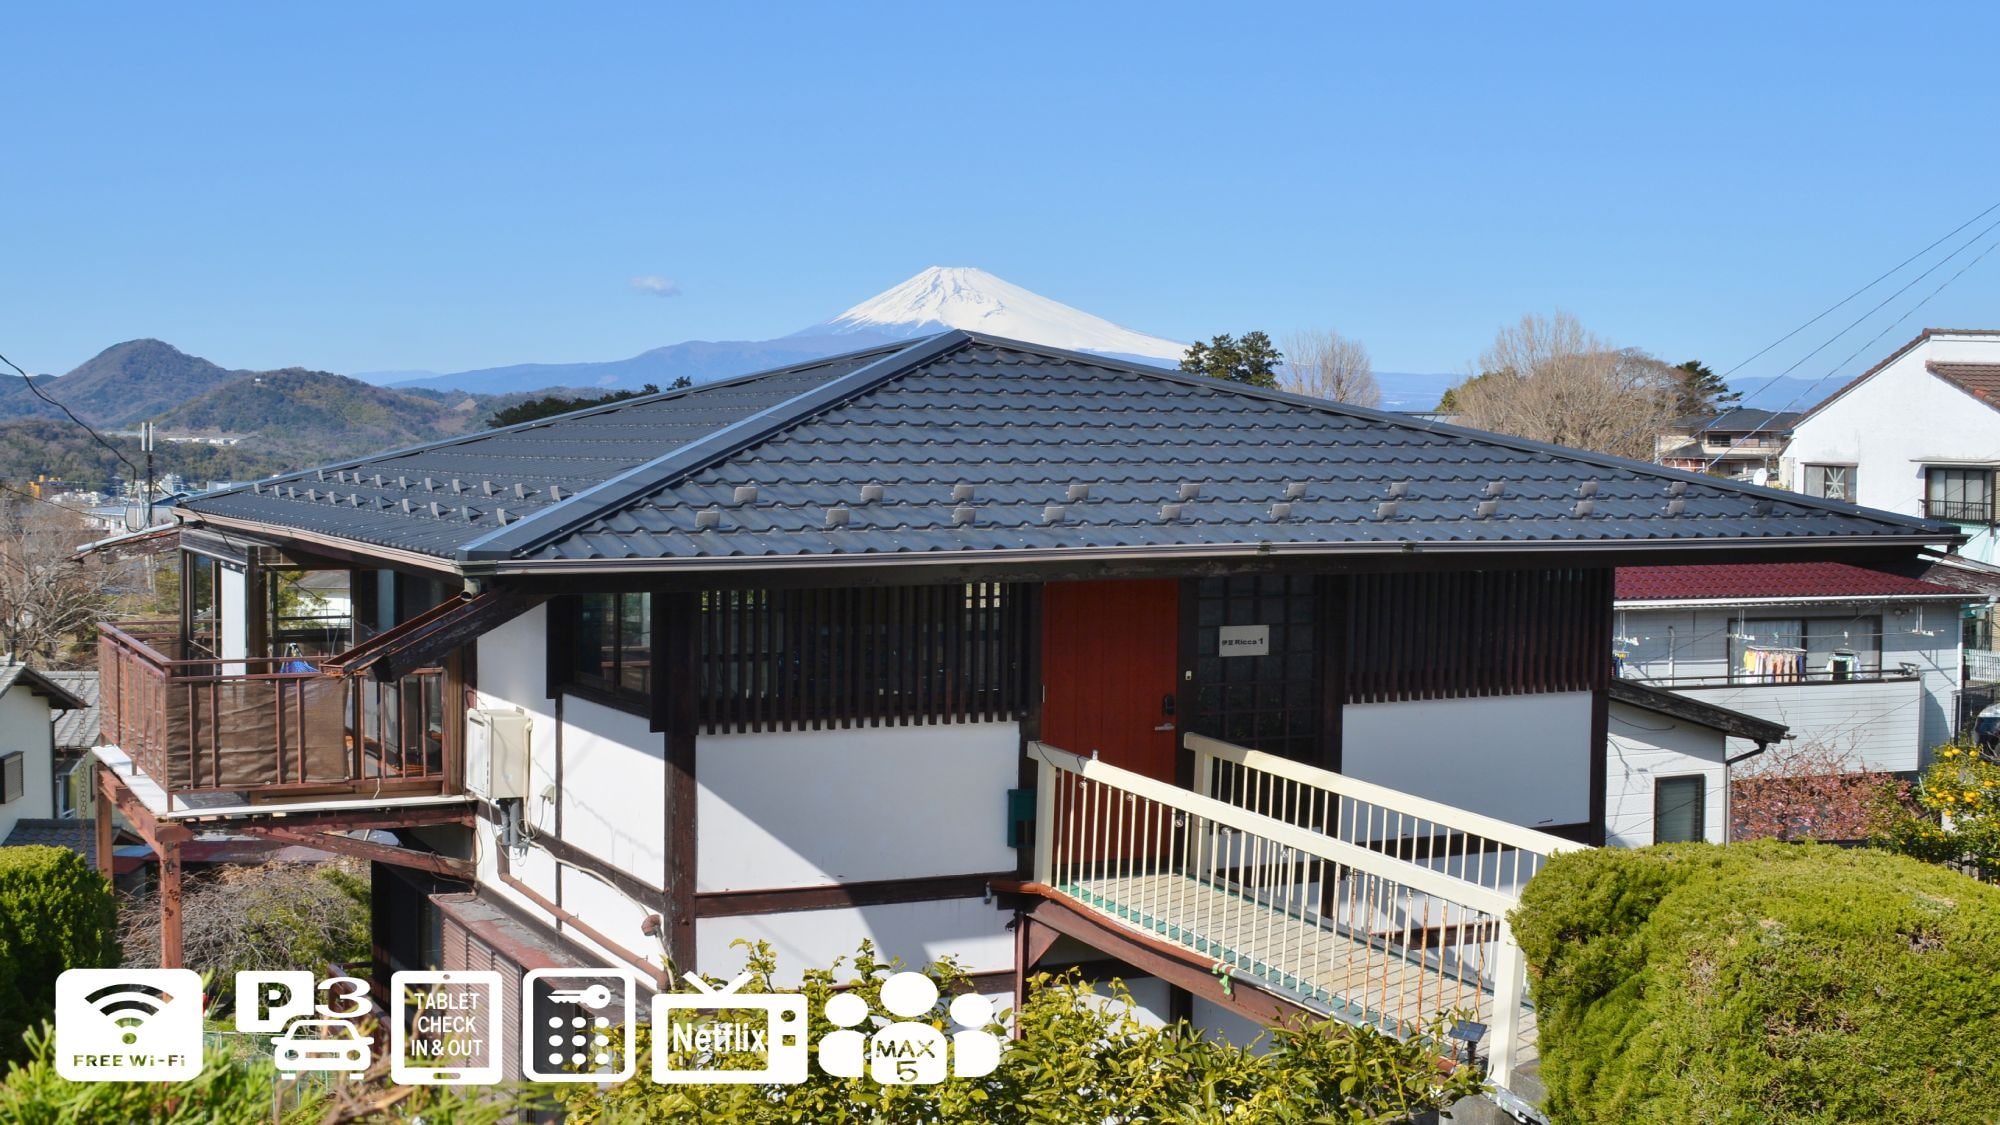 ・Izu Ricca stands with majestic Mt. Fuji in the background. Accommodates up to 5 people